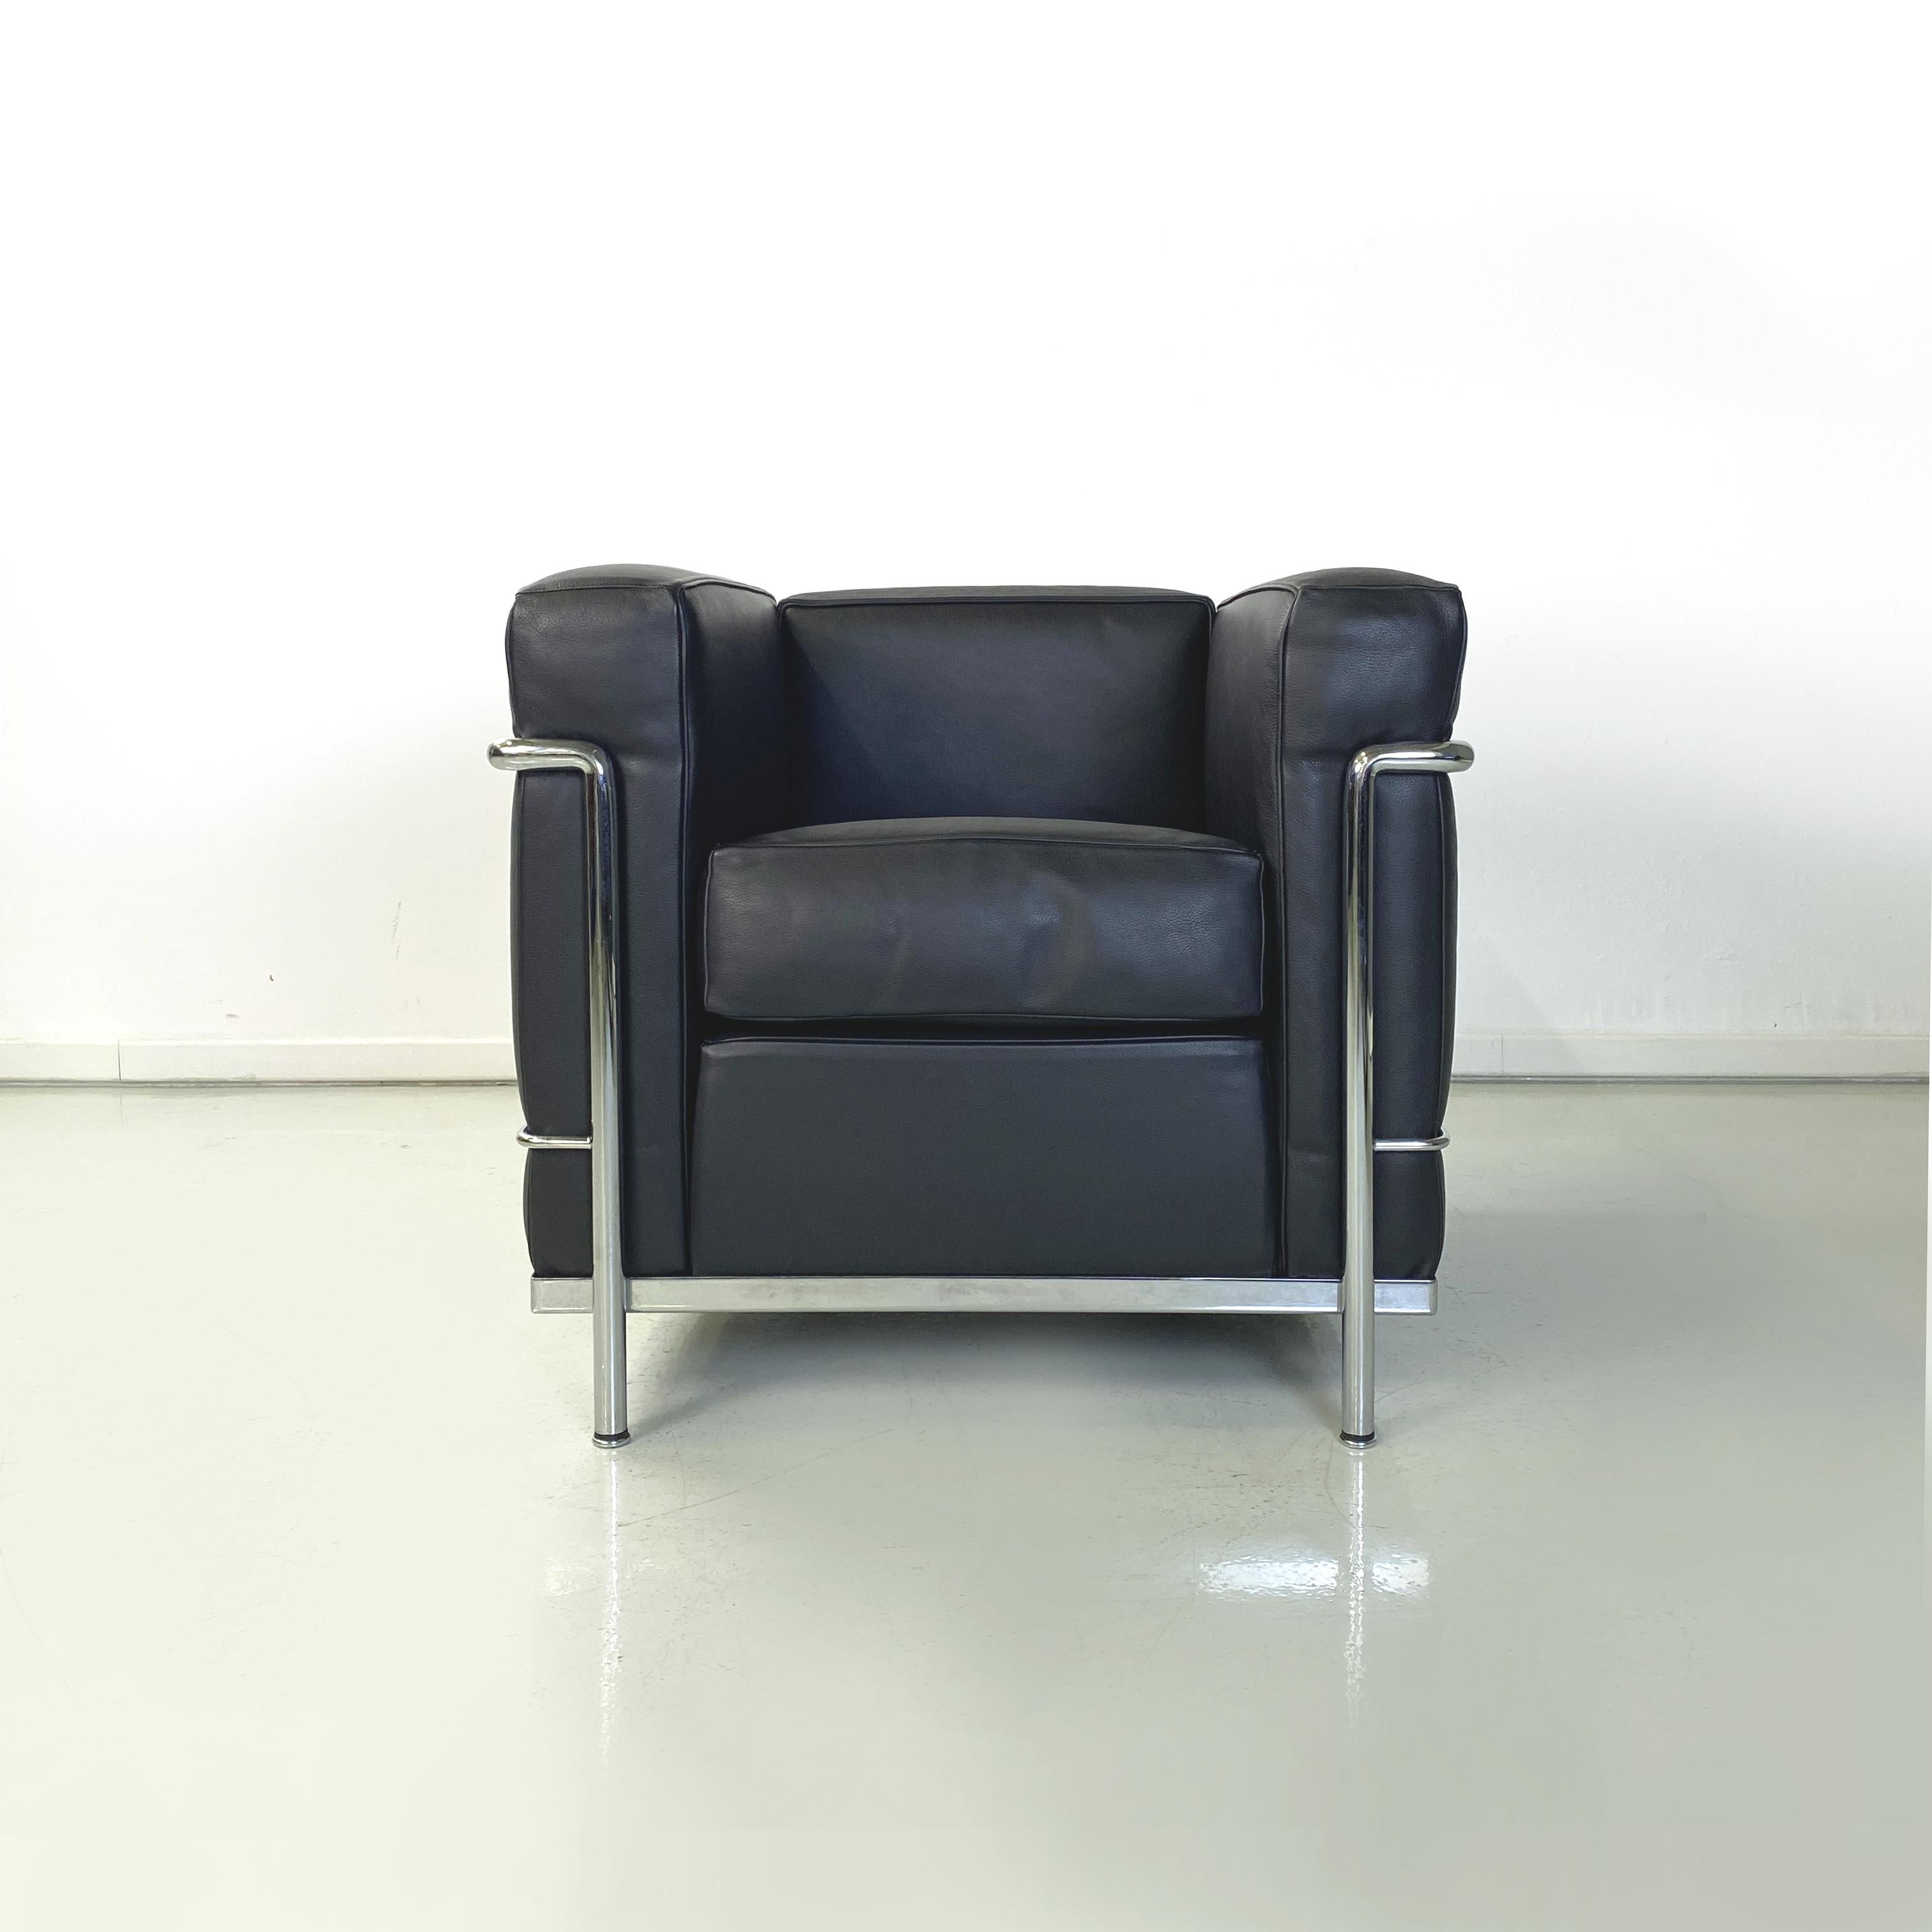 Italian modern Armchair mod. LC3 by Le Corbusier, Jeanneret and Perriand for Cassina, 1980s
Armchair mod. LC3 with metal tubular structure. The squared seats, backrests and armrests are upholstered and upholstered in black leather. 
Produced by